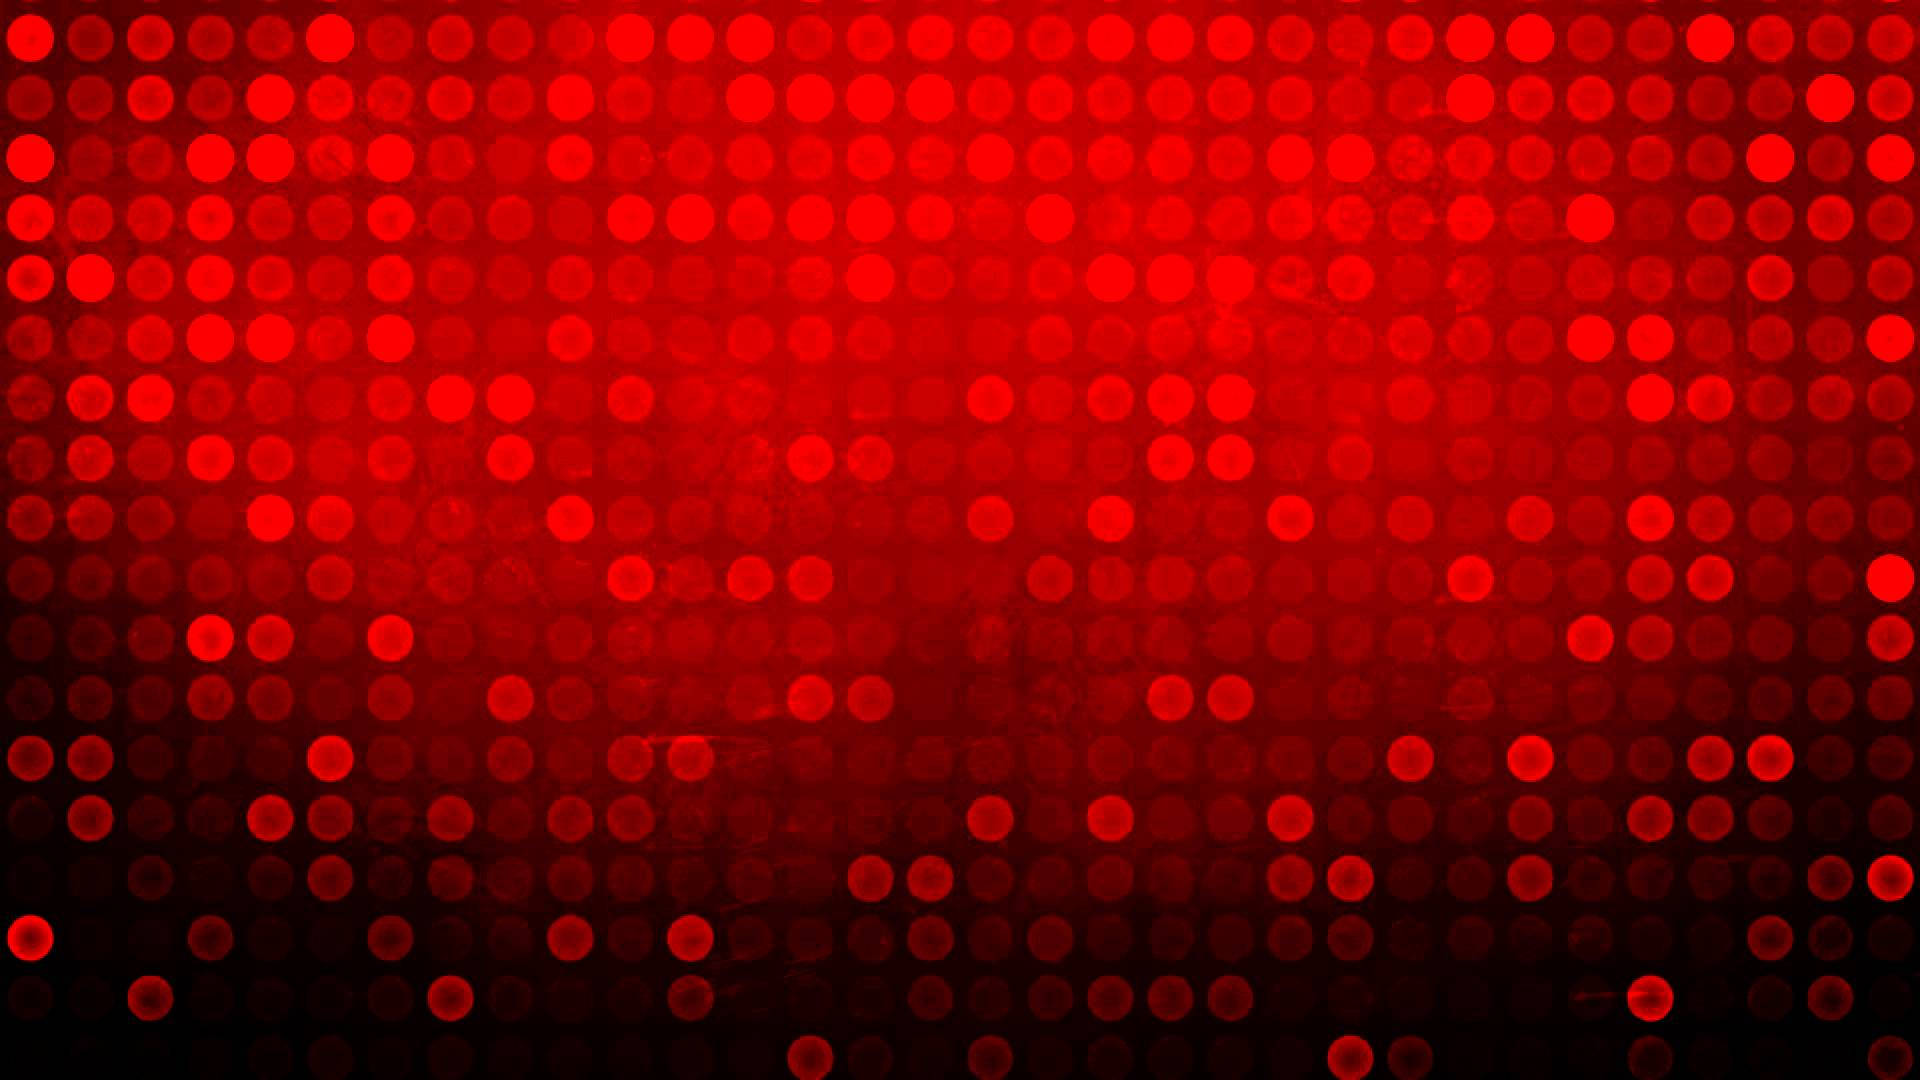 A Vibrant Red Display Of Neon Lights. Background